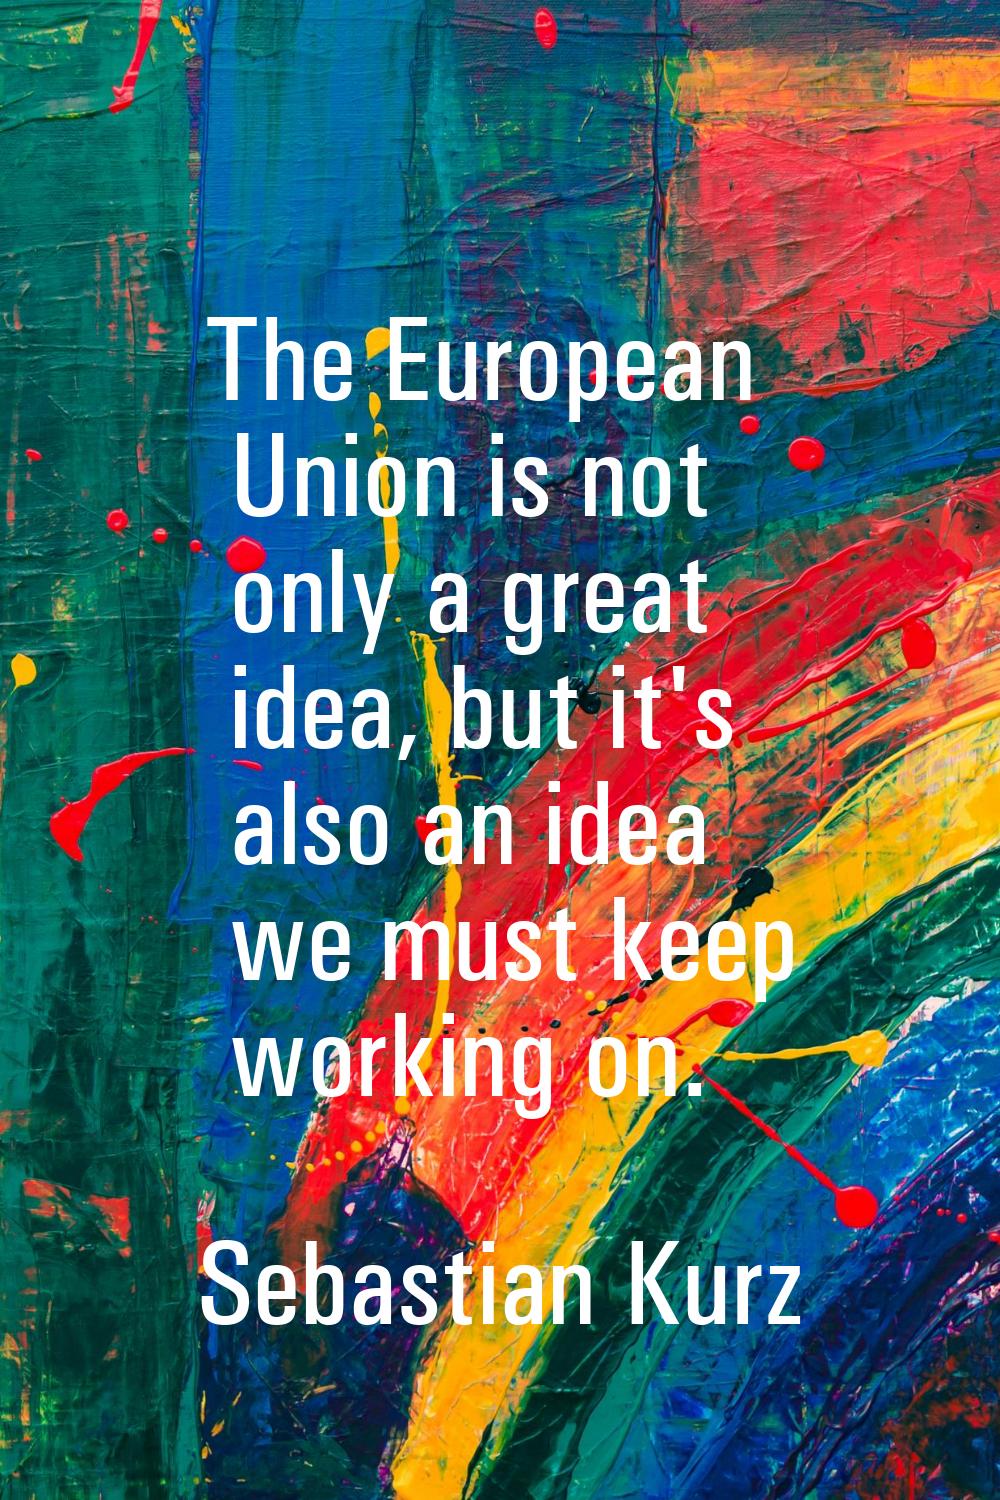 The European Union is not only a great idea, but it's also an idea we must keep working on.